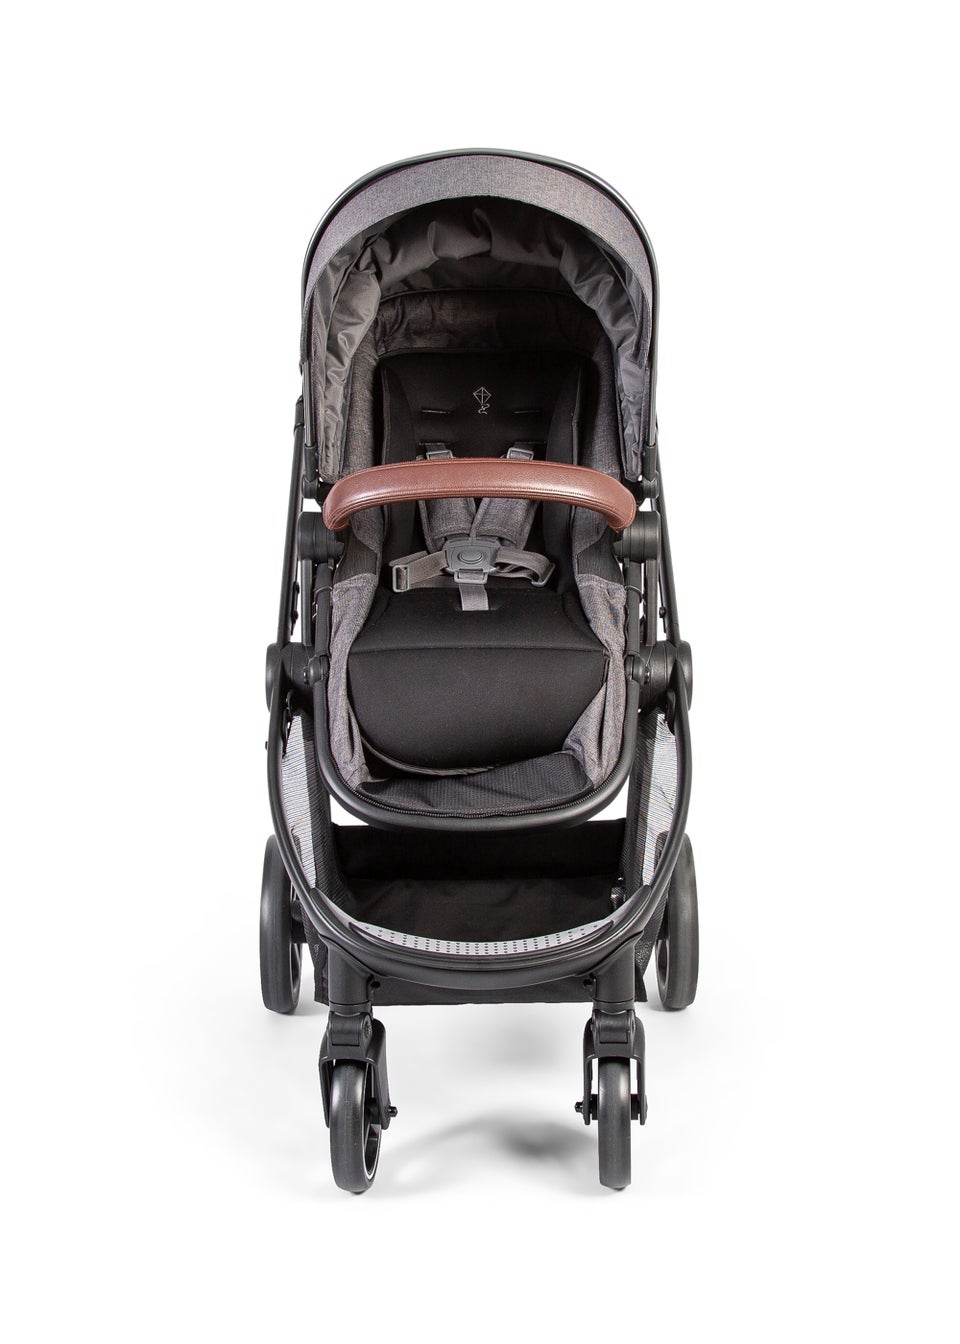 Red Kite Push Me Pace i Icon Travel System